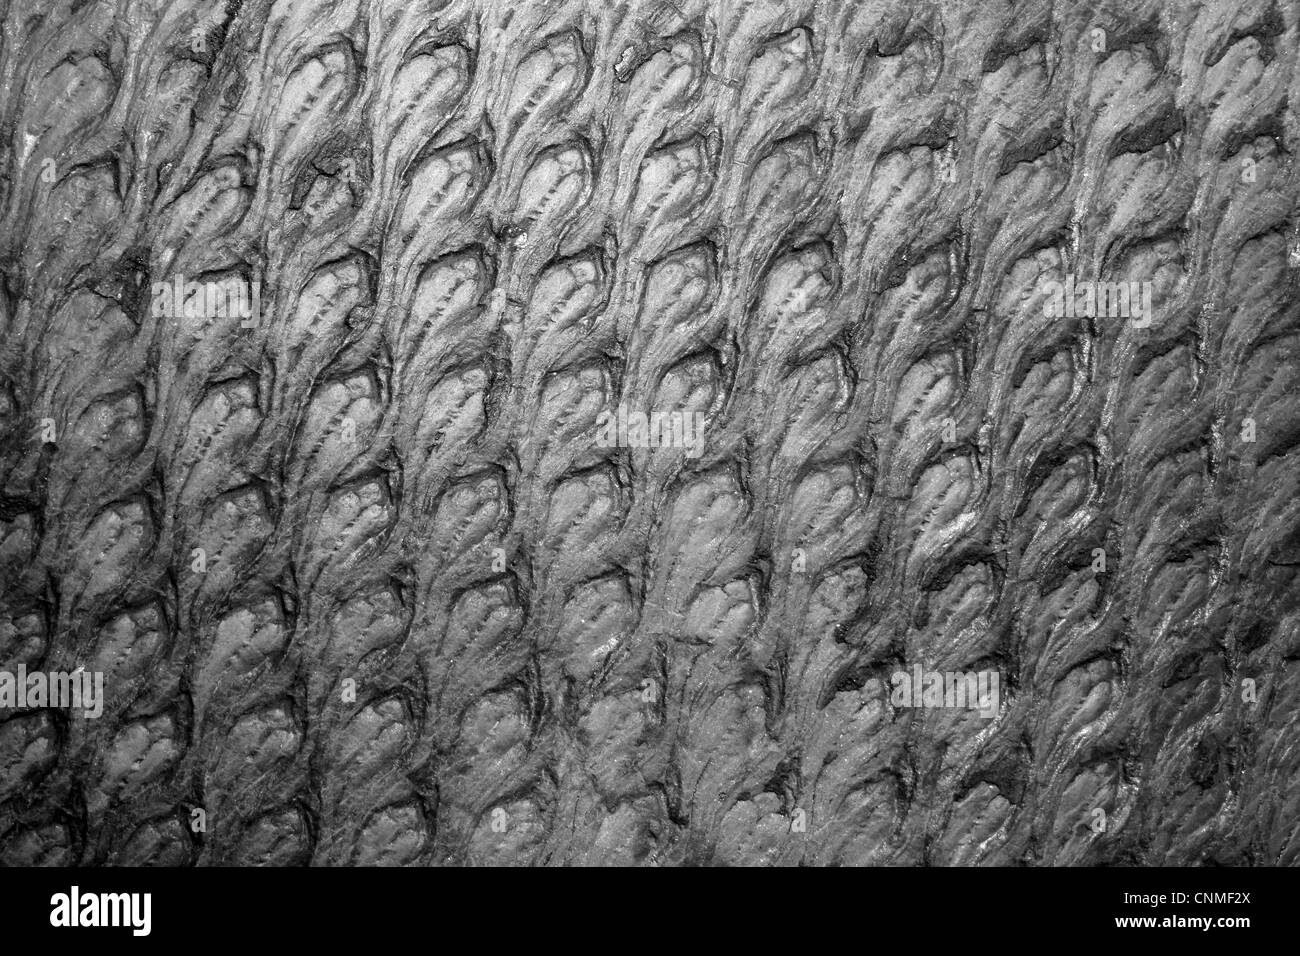 Bark Pattern Of The Carboniferous Lycopod Lepidodendron aculeatum Stock Photo